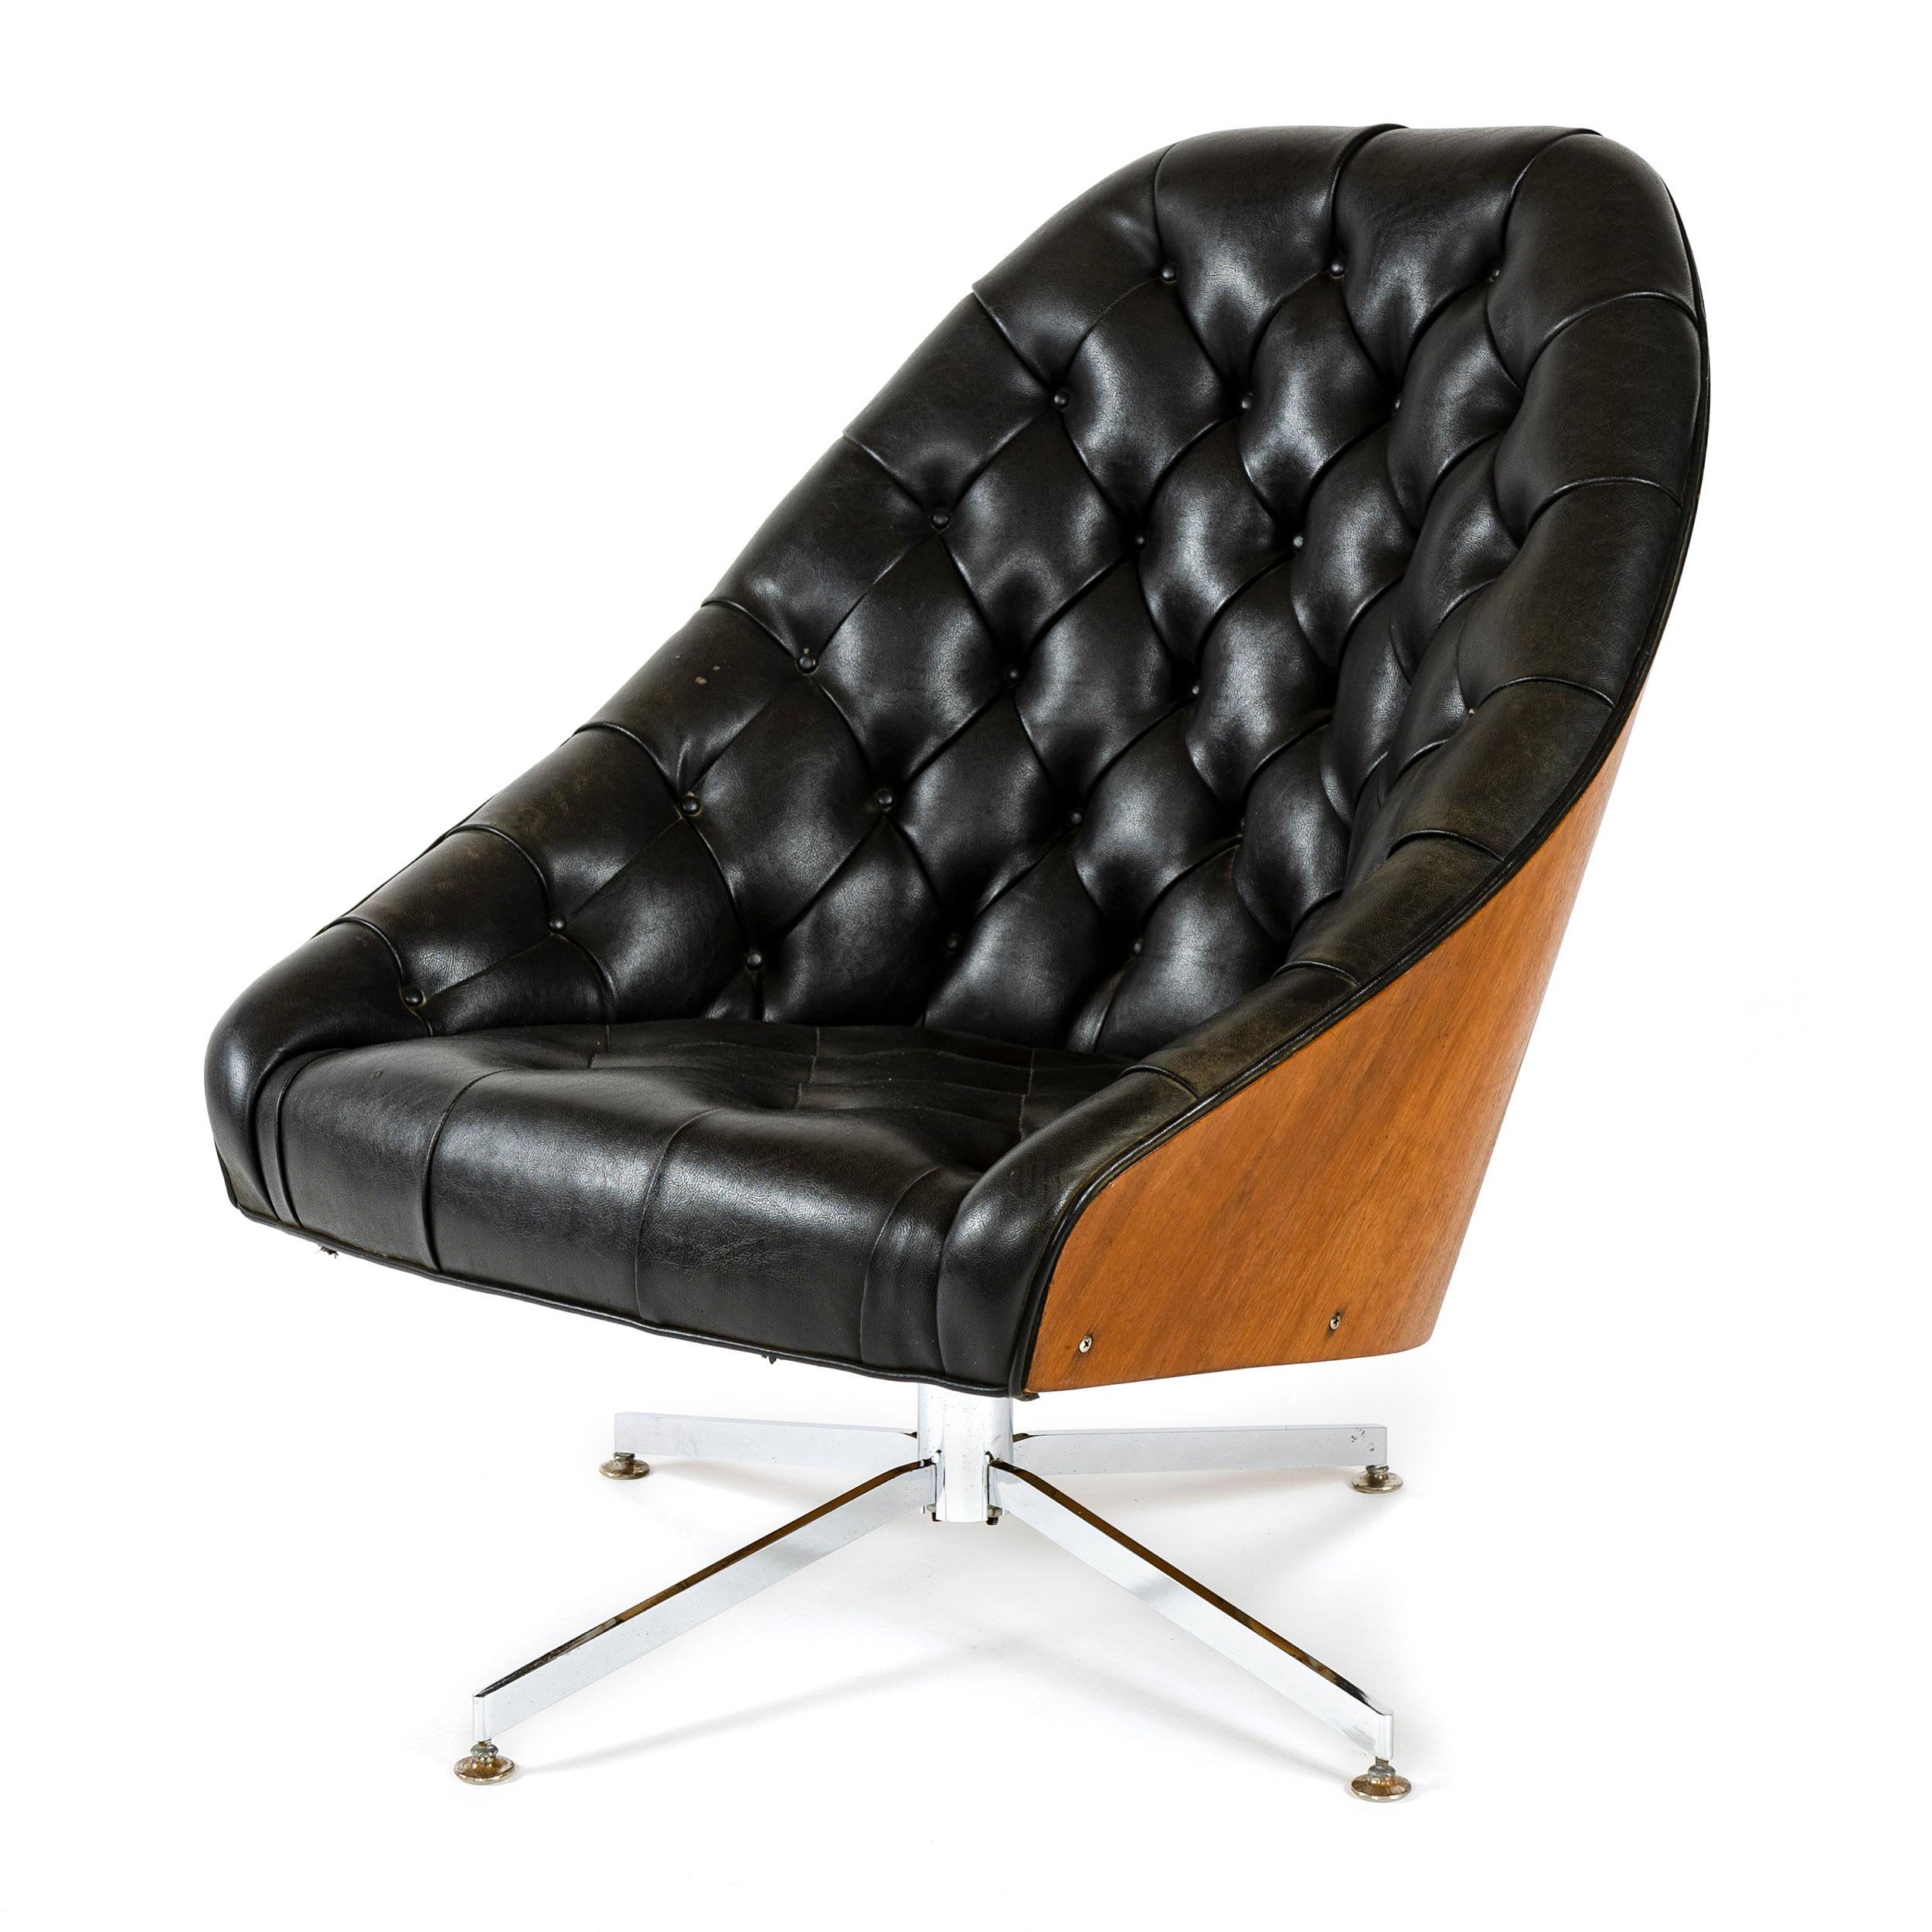 A tufted lounge chair with wrap around walnut back set on a bright chrome, reclining pedestal swivel base.